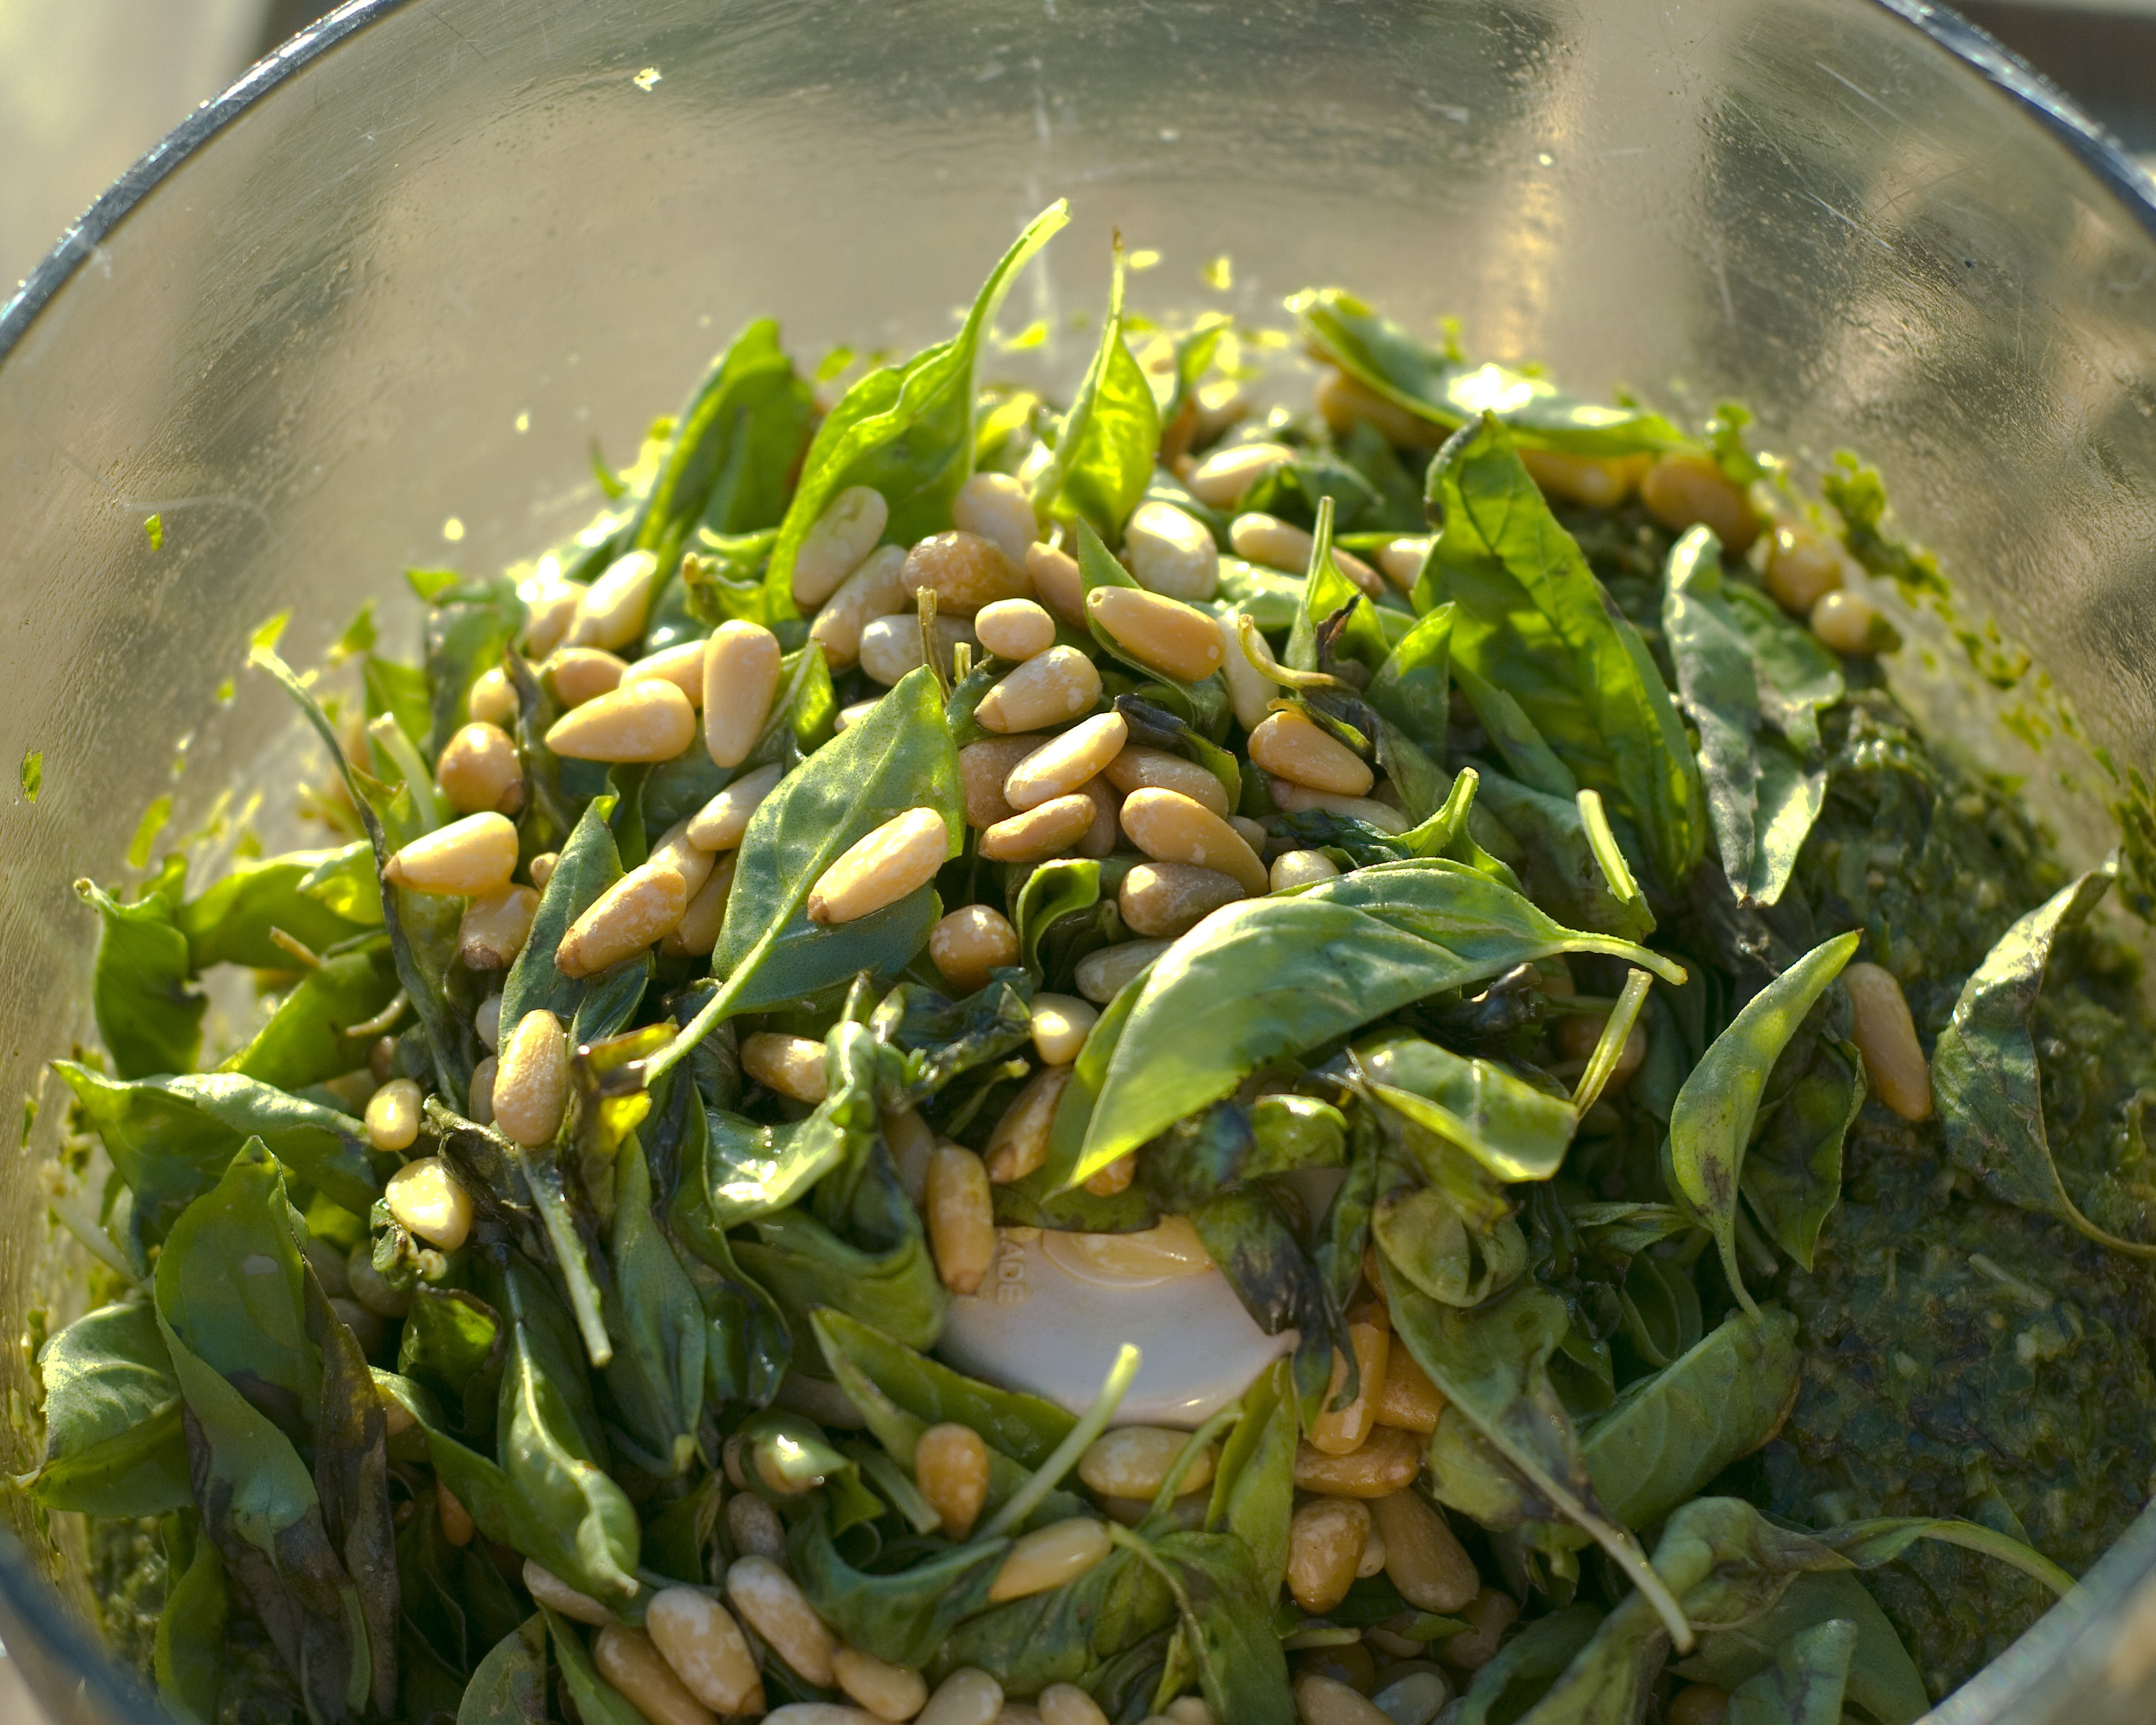 Making pesto with pine nuts and basil